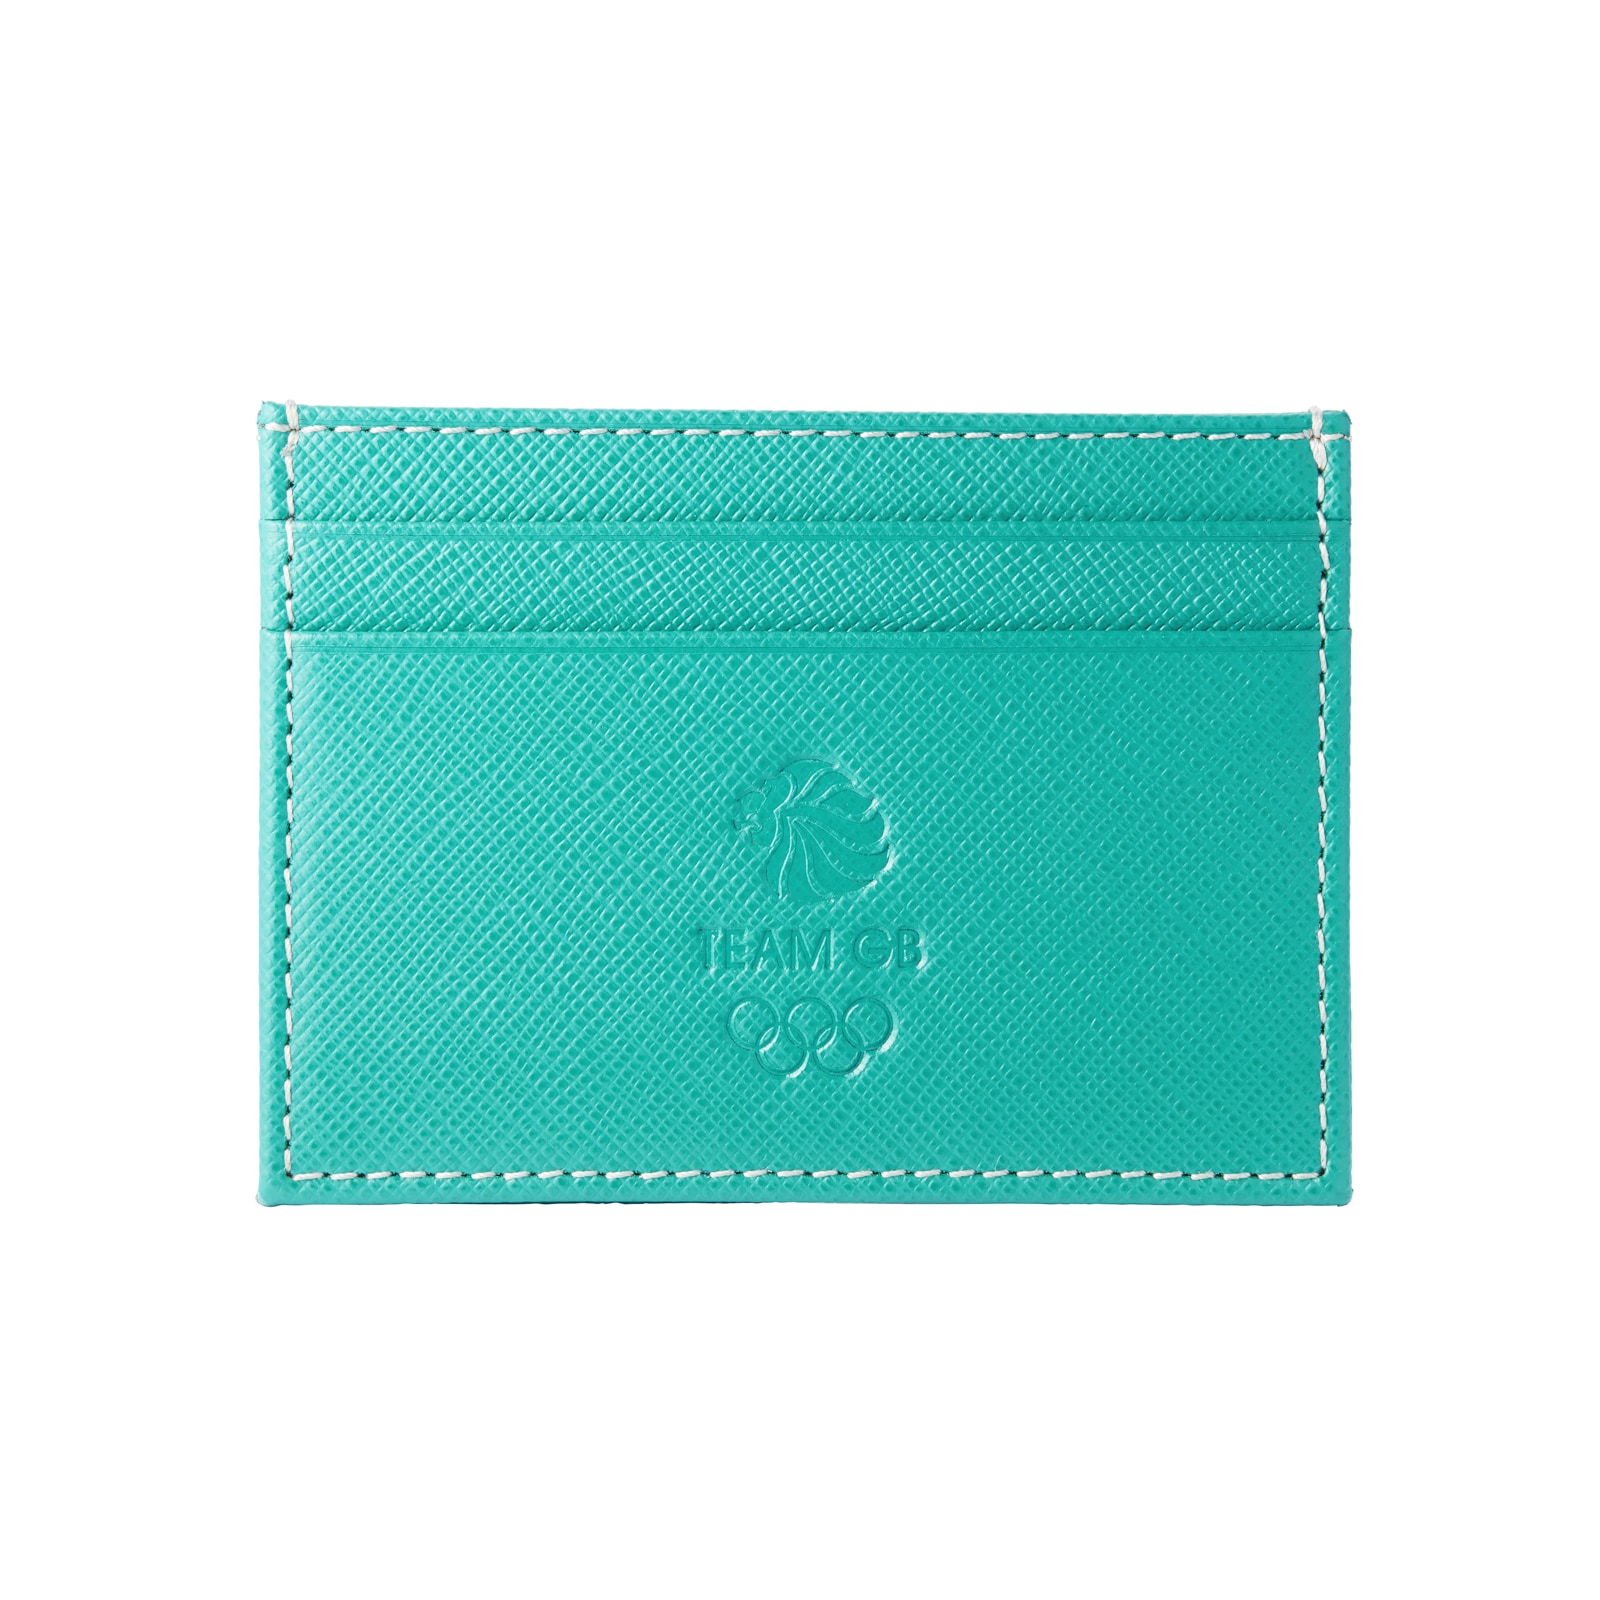 Team GB Saffiano Leather 4CC Wallet - Turquoise